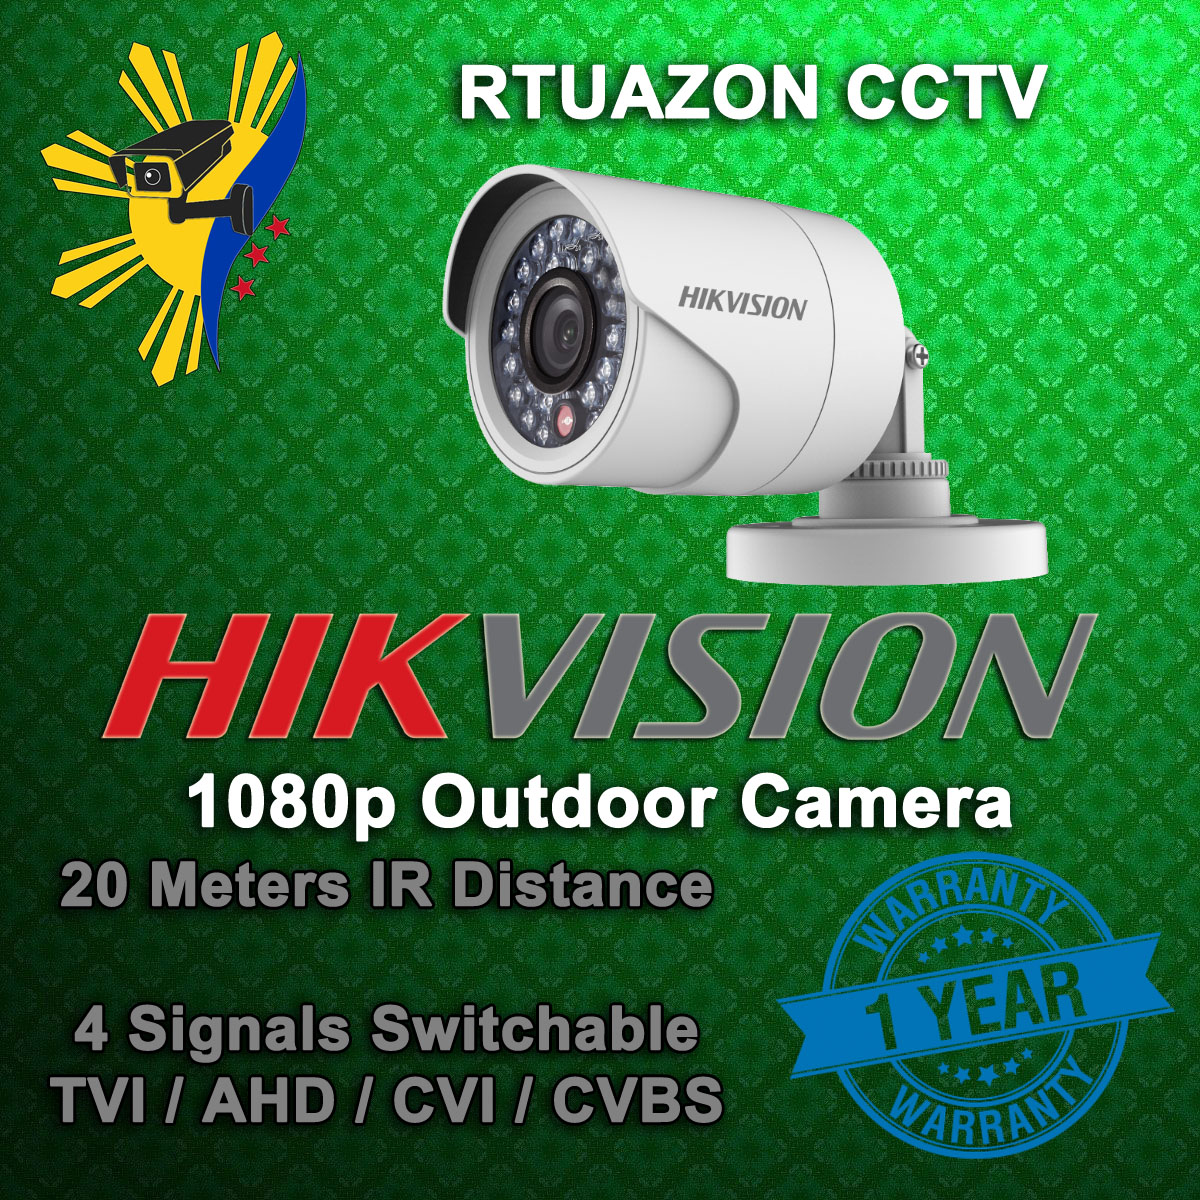 Hikvision 1080p Outdoor Camera: Buy 